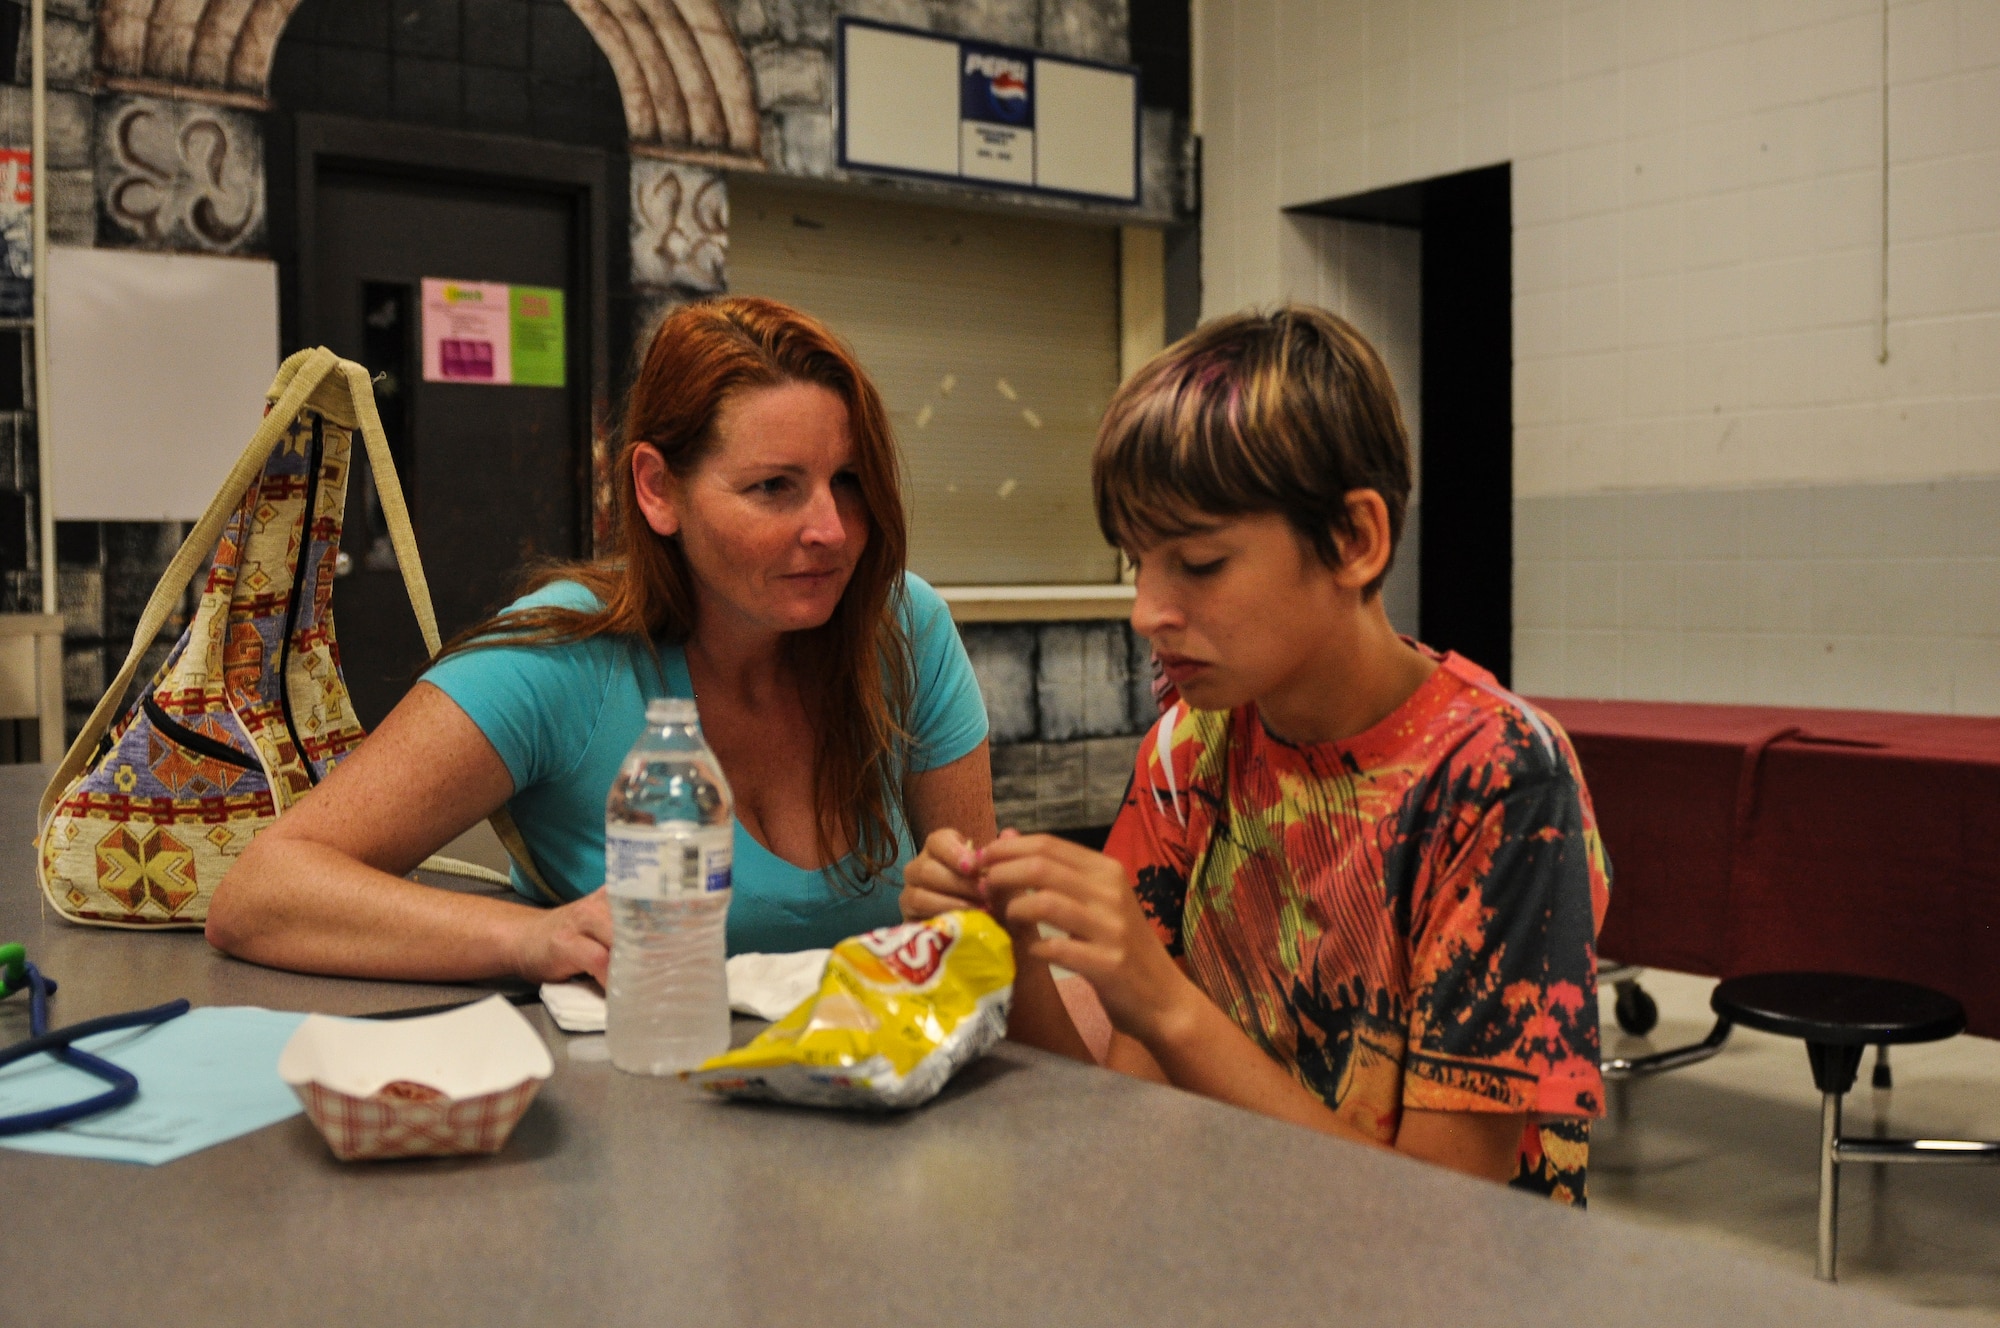 Morgan Jungk, daughter of Master Sgt. Beth Jungk, a 19th Communications Squadron plans and programs manager, eats by her mother during orientation night Aug. 15, 2013, at Northwood Middle School in Gravel Ridge, Ark. Beth tried to acclimate Morgan to the idea of going back to school by taking her to her classrooms and meeting her teachers. (U.S. Air Force photo by Staff Sgt. Jake Barreiro)